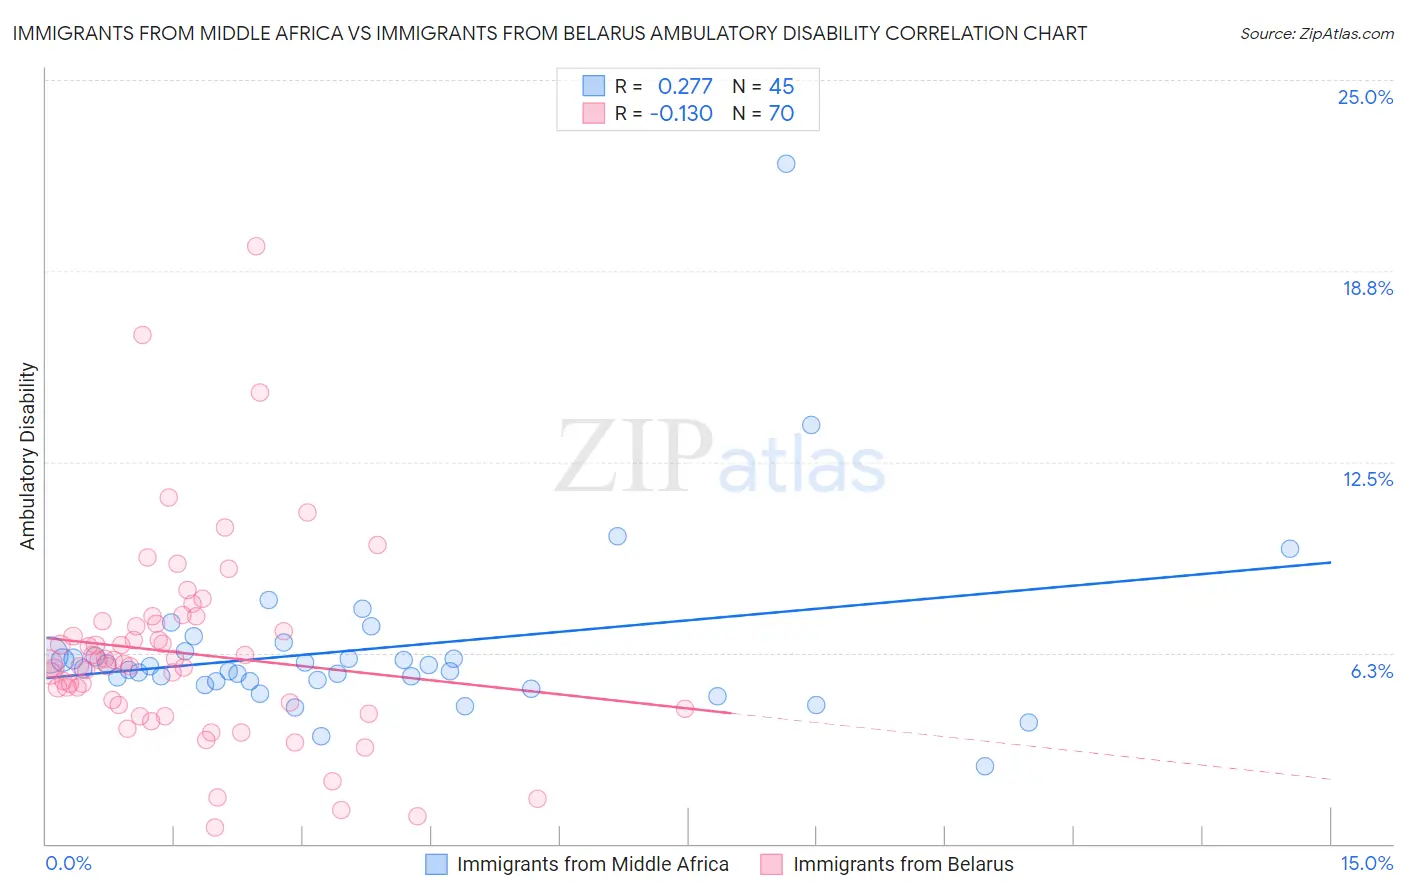 Immigrants from Middle Africa vs Immigrants from Belarus Ambulatory Disability